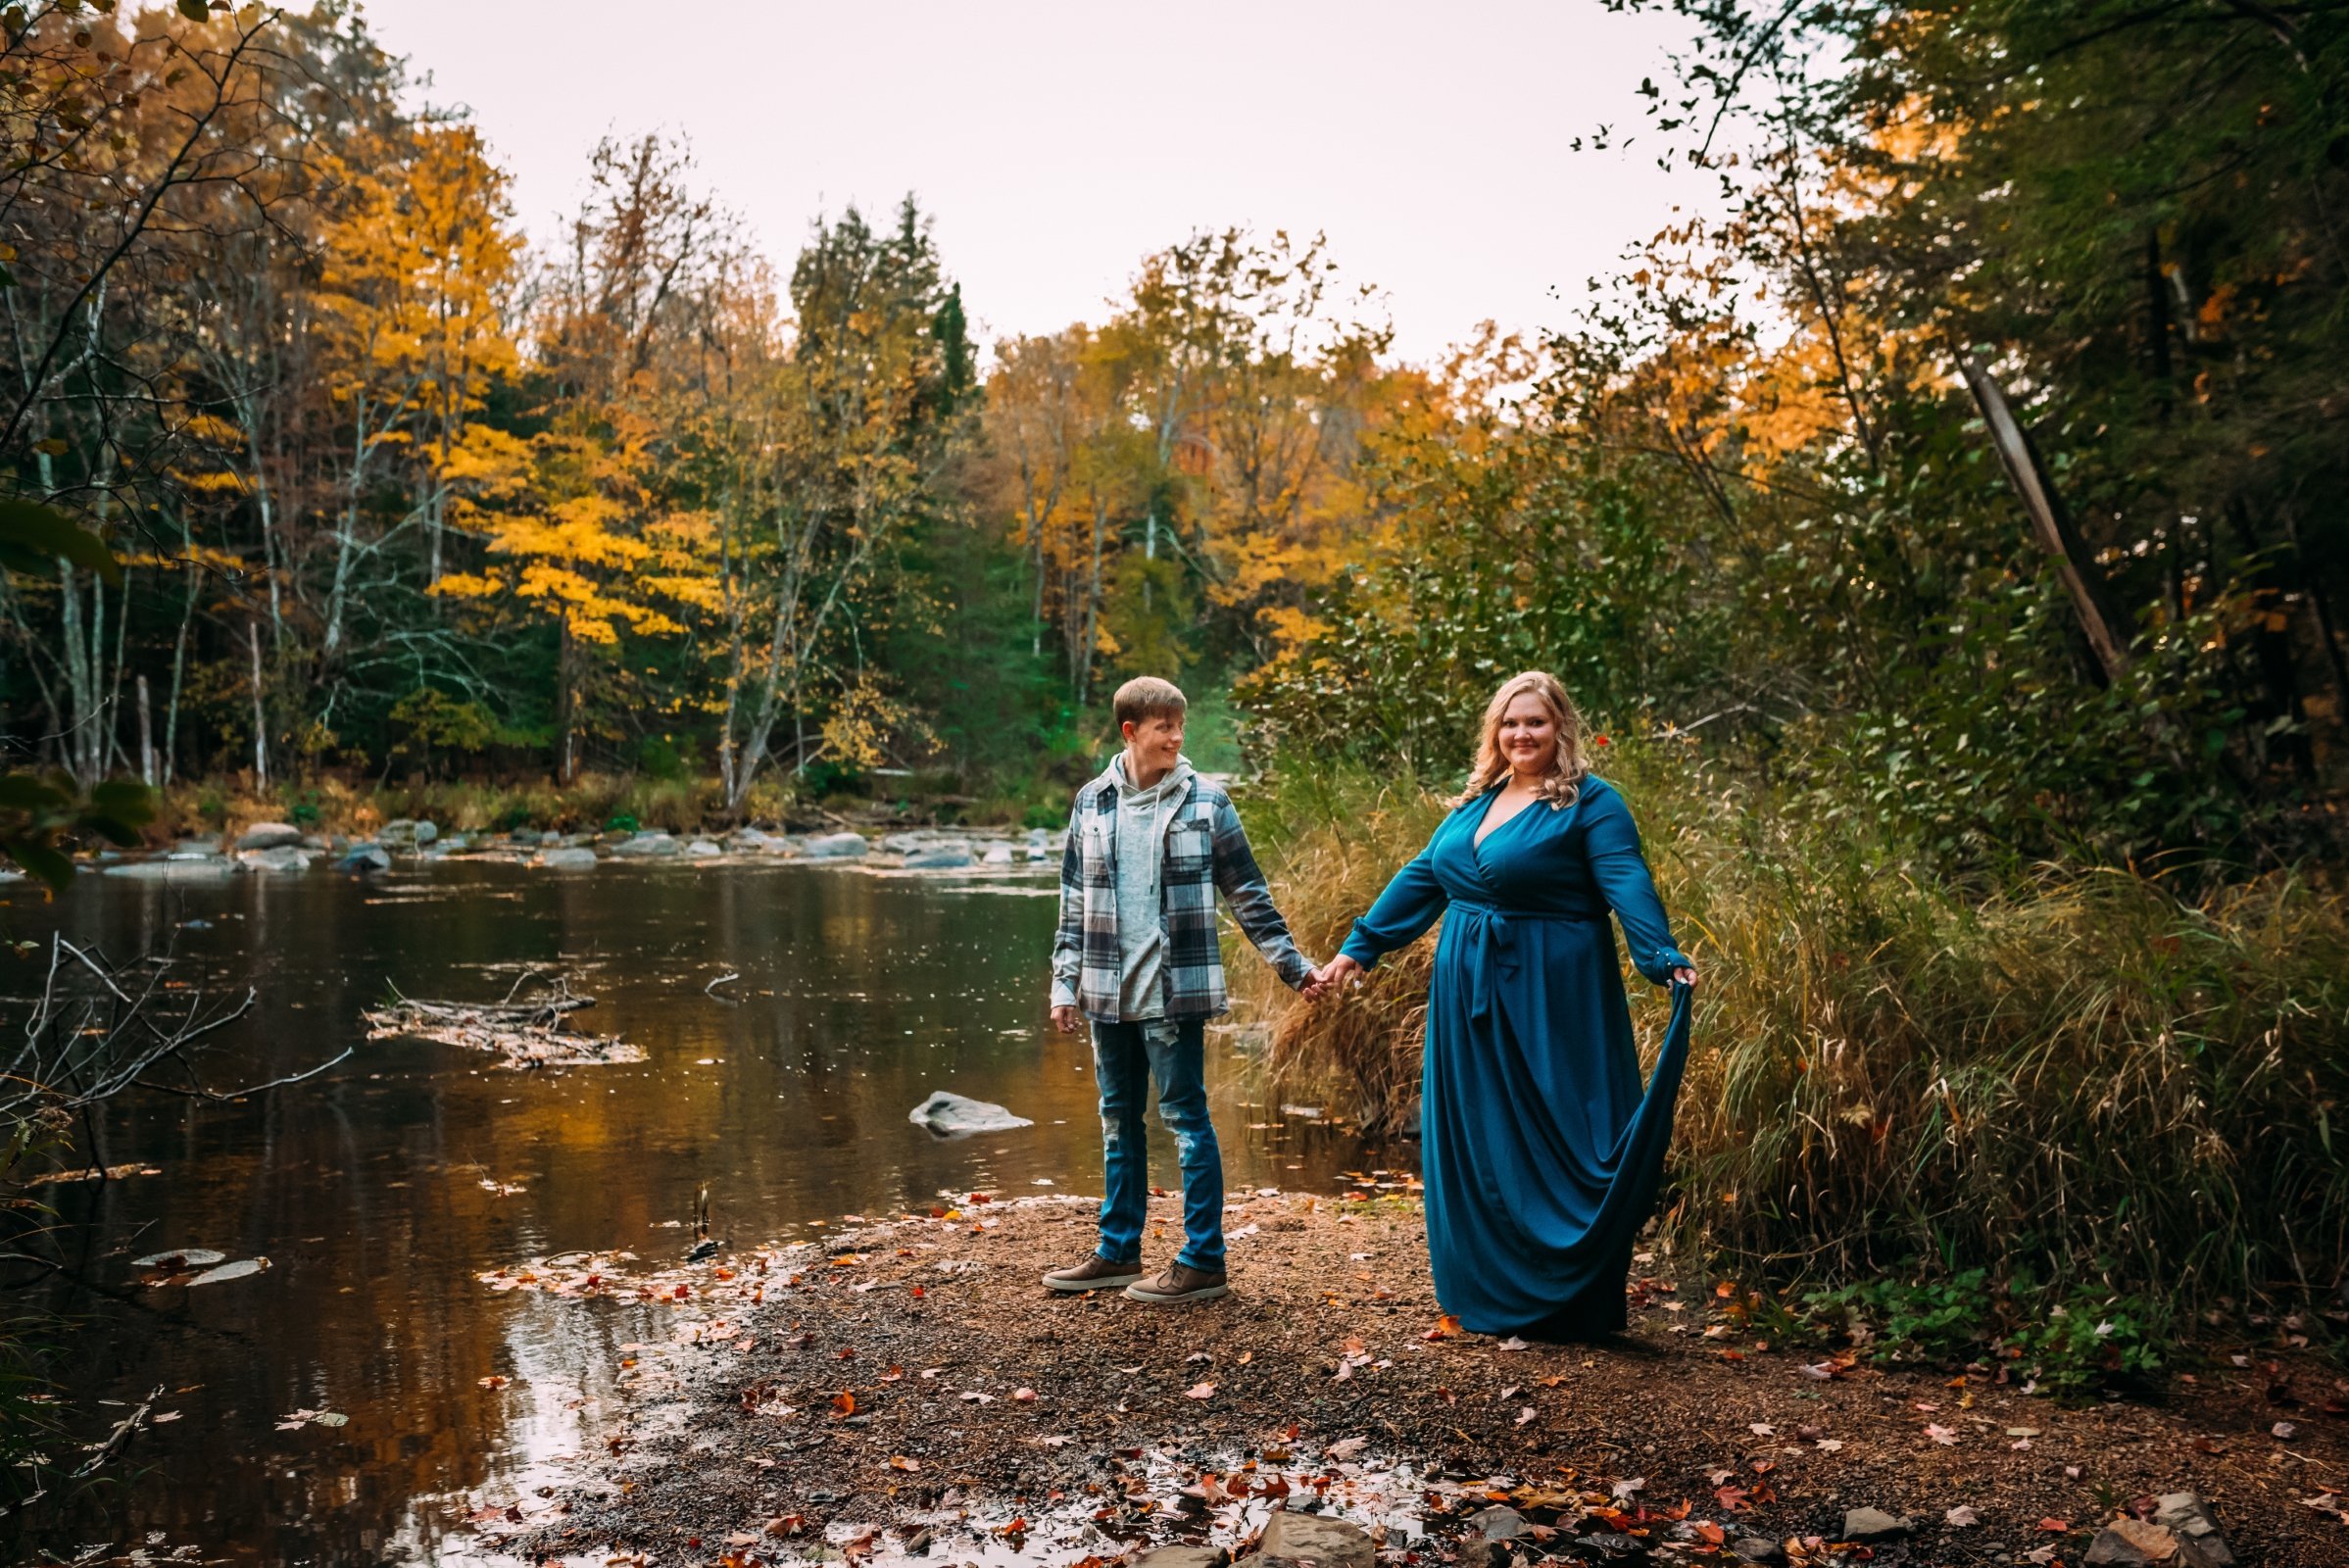 What to Wear for Engagement Photos, Engagement Photo outfits, Wisconsin engagement photographer, fall engagement photos, eau claire dells wisconsin